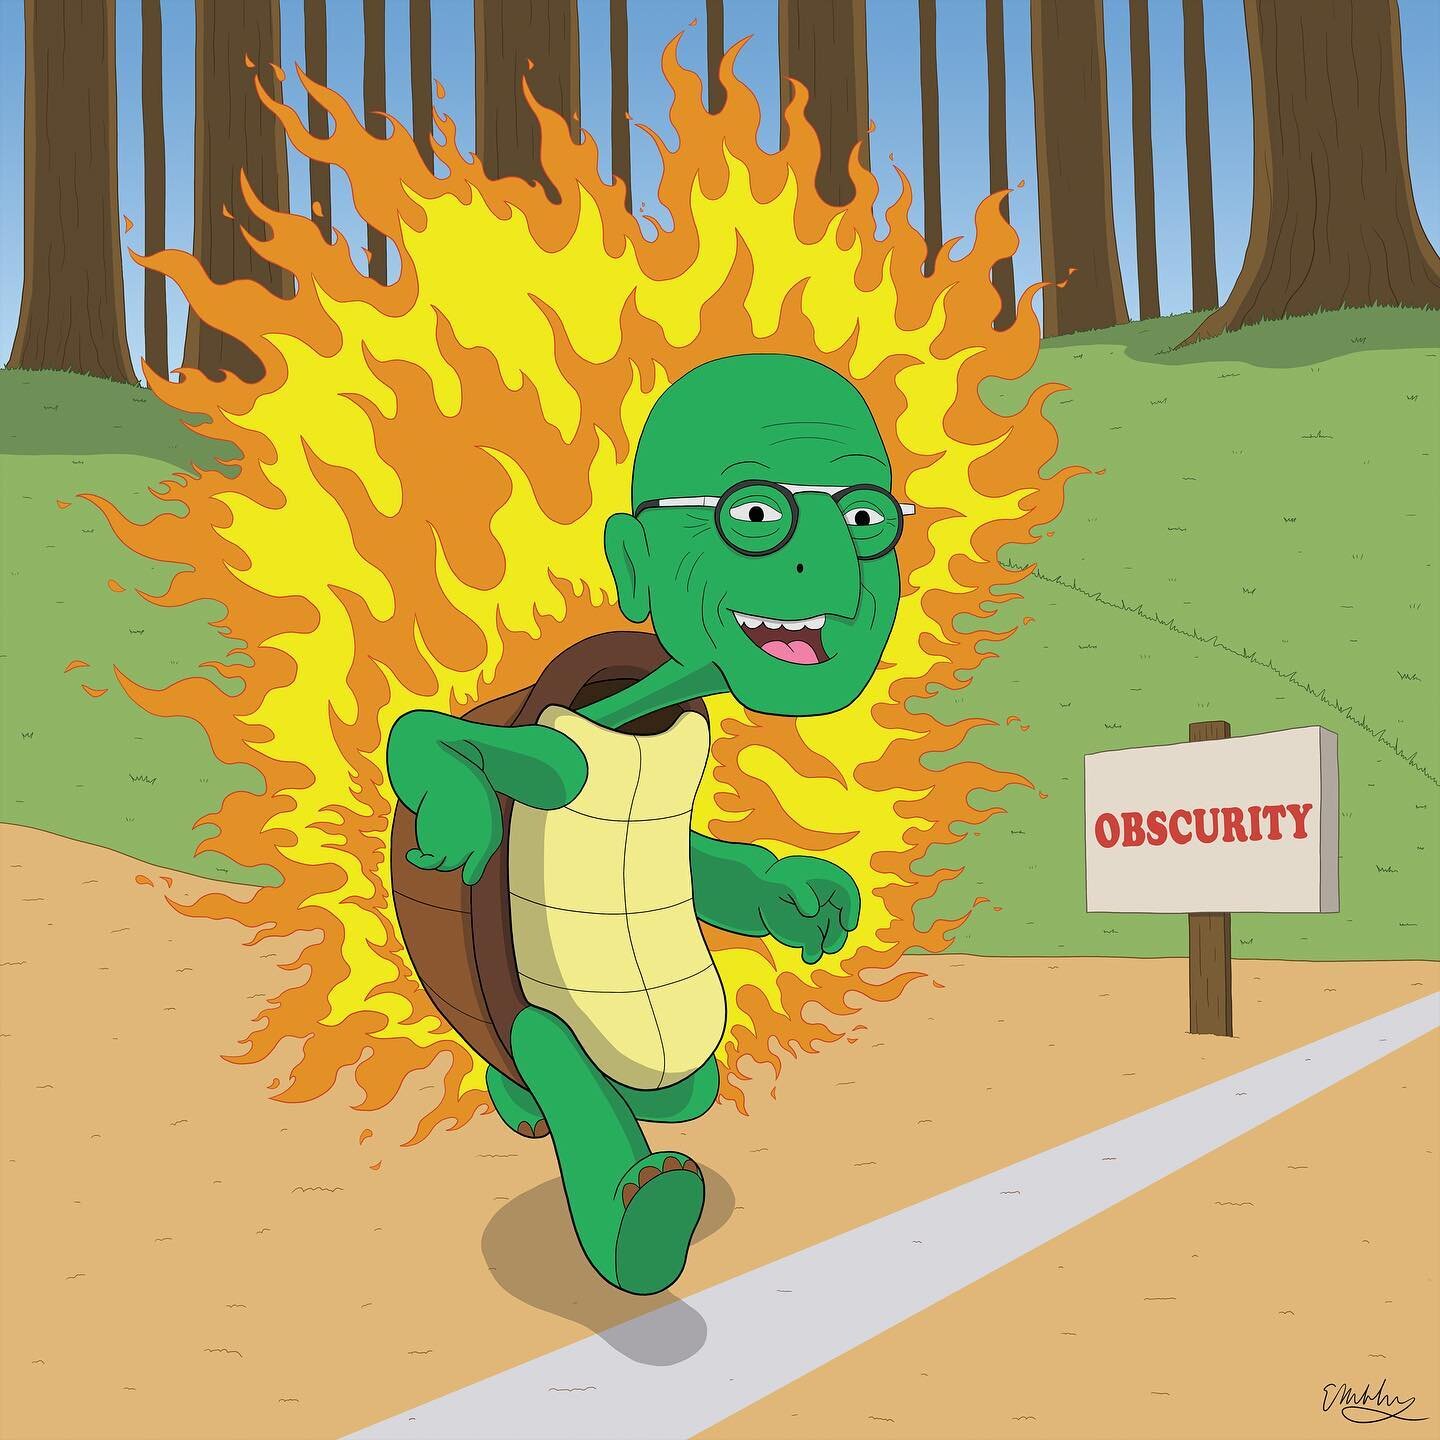 AS THE WORLD BURNS&mdash; Howie Mandel

Art by @eddiemauldin 

The first time I was here you thought I was mean. Really I was just honored to meet Mr. Clean.

Howie hates germs, they cause him much strife. He wrote a book called &ldquo;Don&rsquo;t To